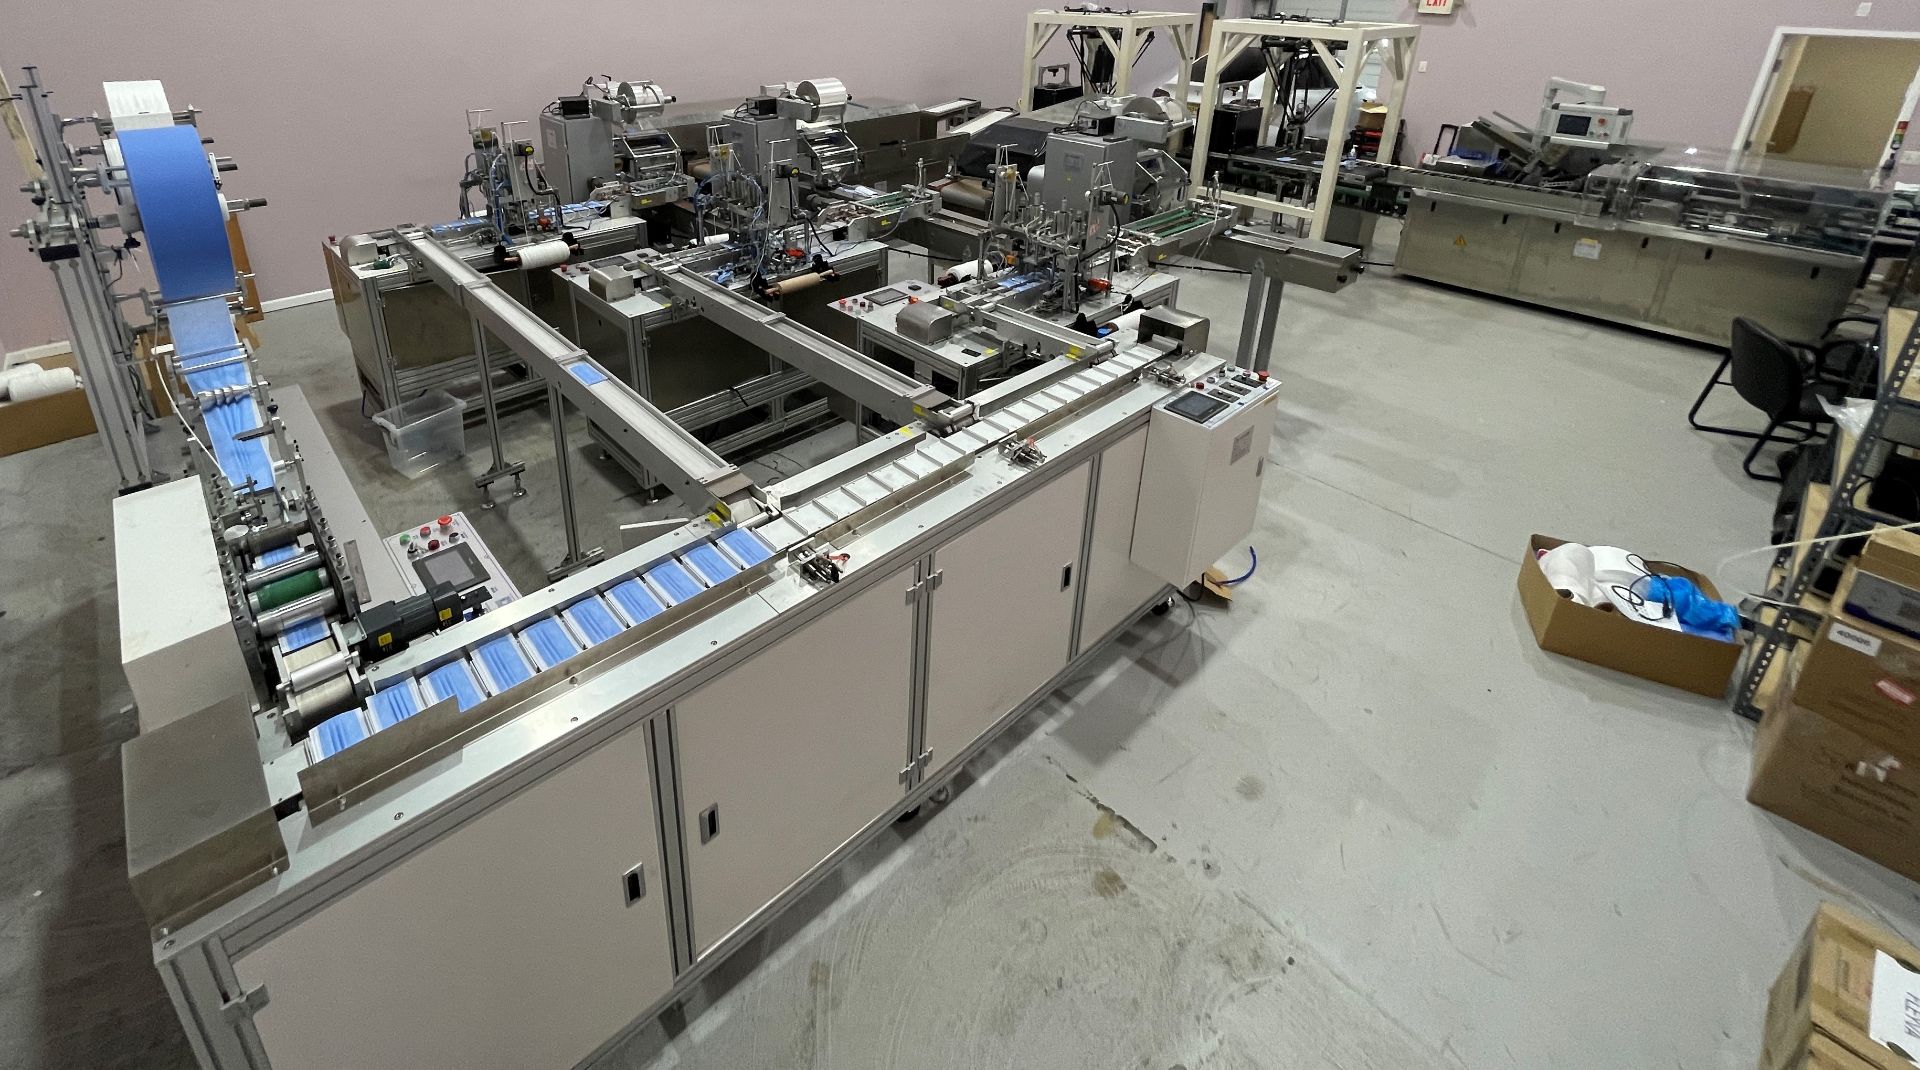 COMPLETE PACKAGE: 2020 3-Ply Disposable Medical Mask Assembly & Packaging Line Equipment, Includes: - Image 24 of 150